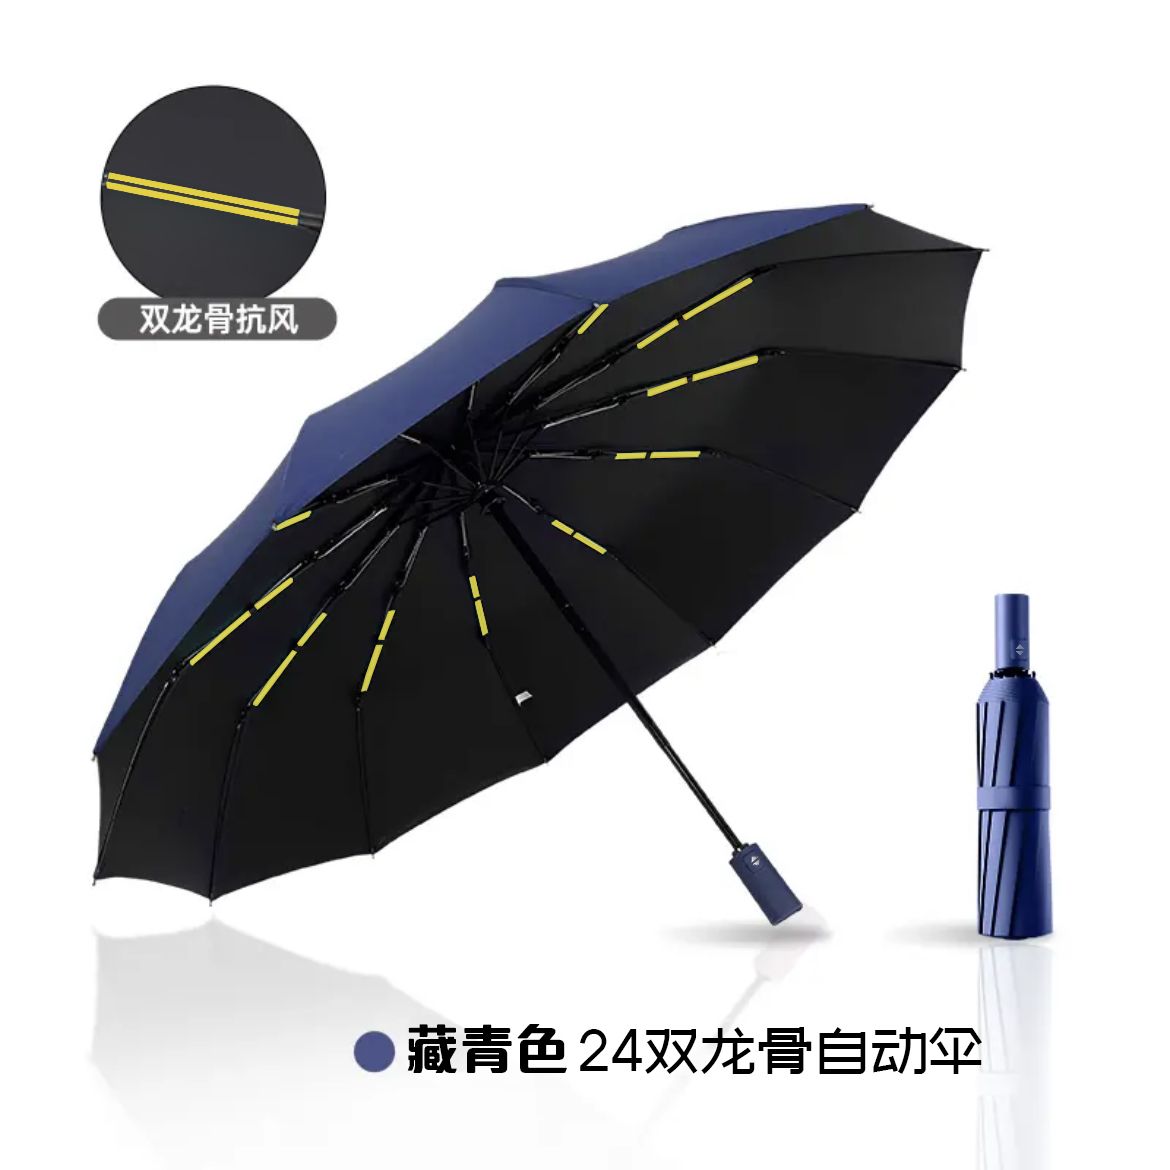 Dragonfly double large umbrella automatic men's and women's rain or shine strong wind-resistant folding anti-UV sun umbrella